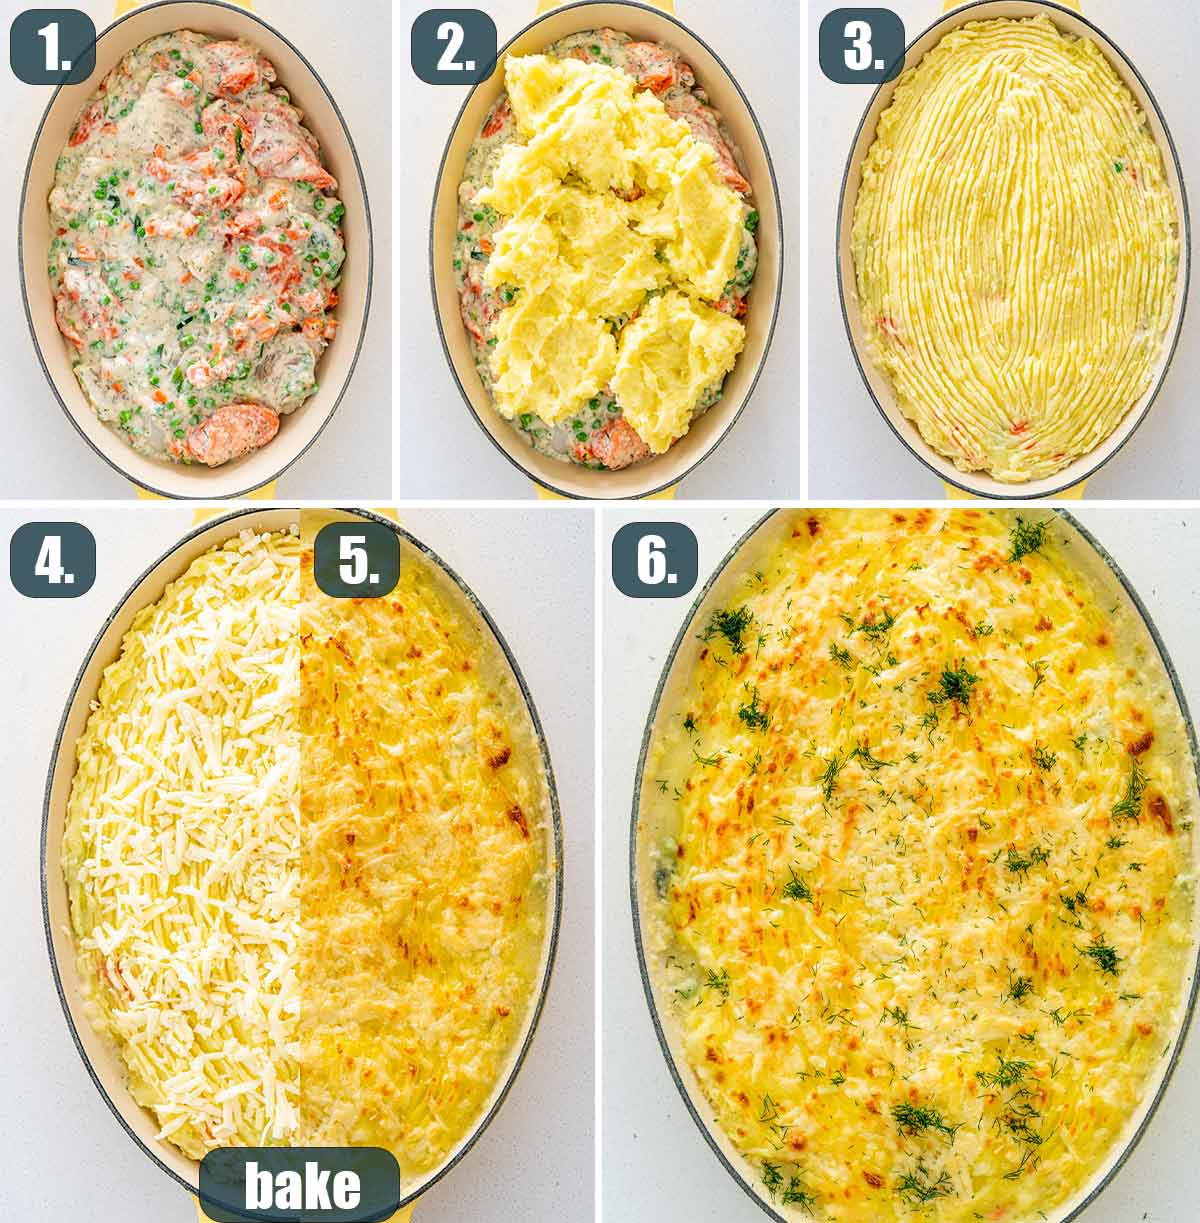 process shots showing how to assemble fish pie and how to bake it.